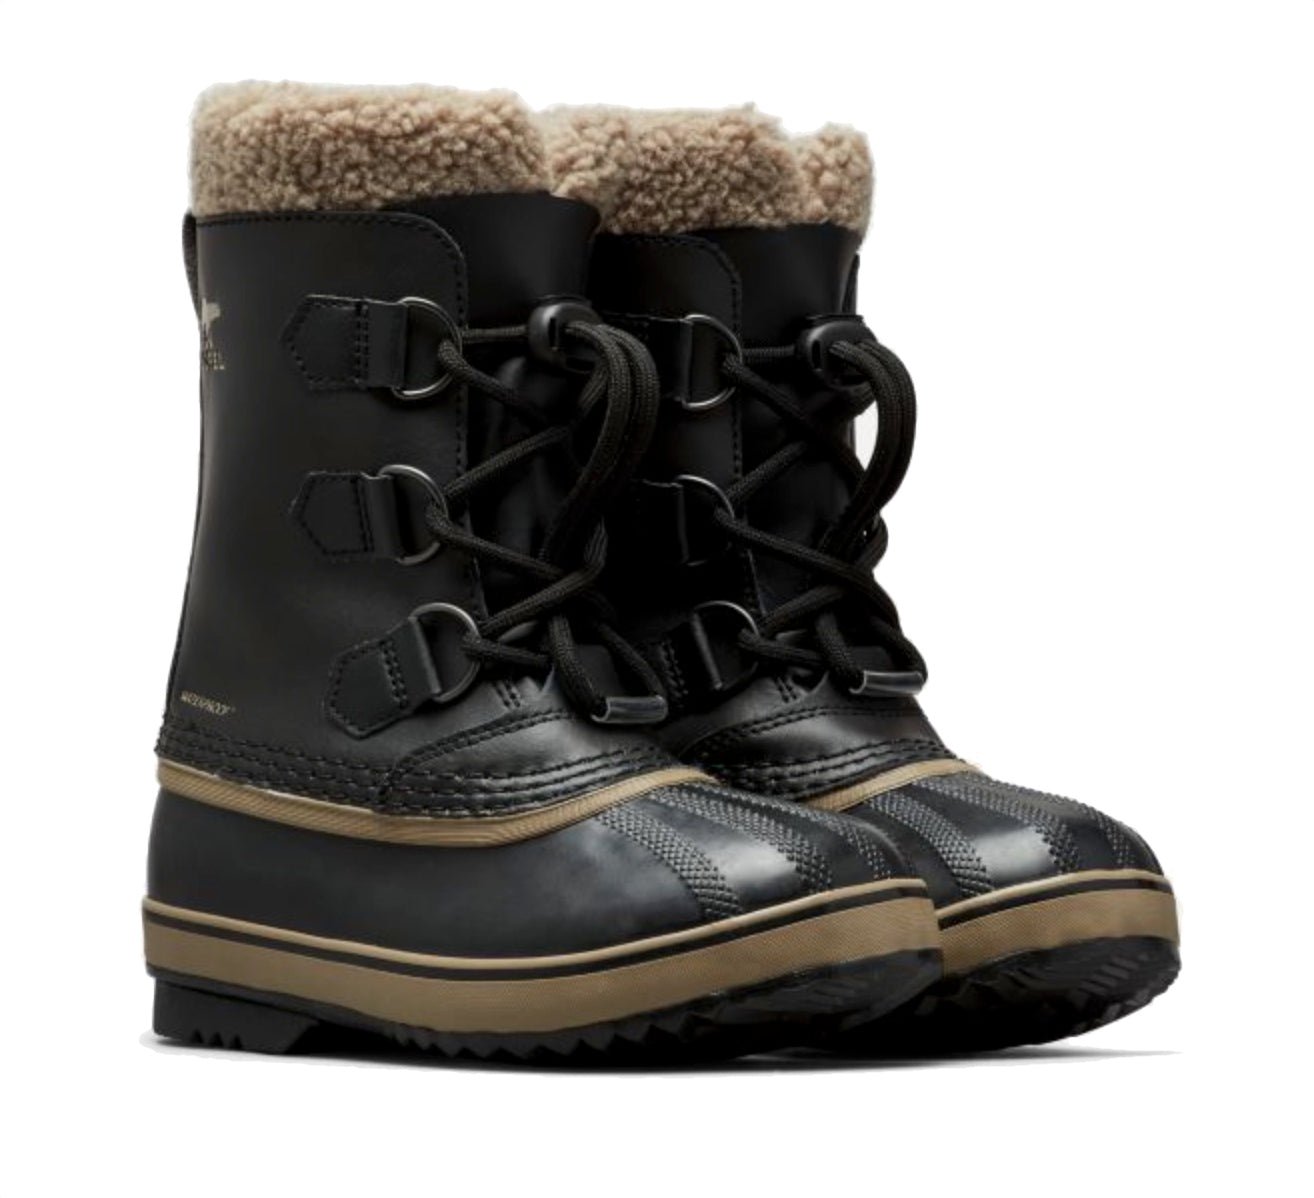 Sorel Kids Winter Boots: Warmth and Style for Little Feet